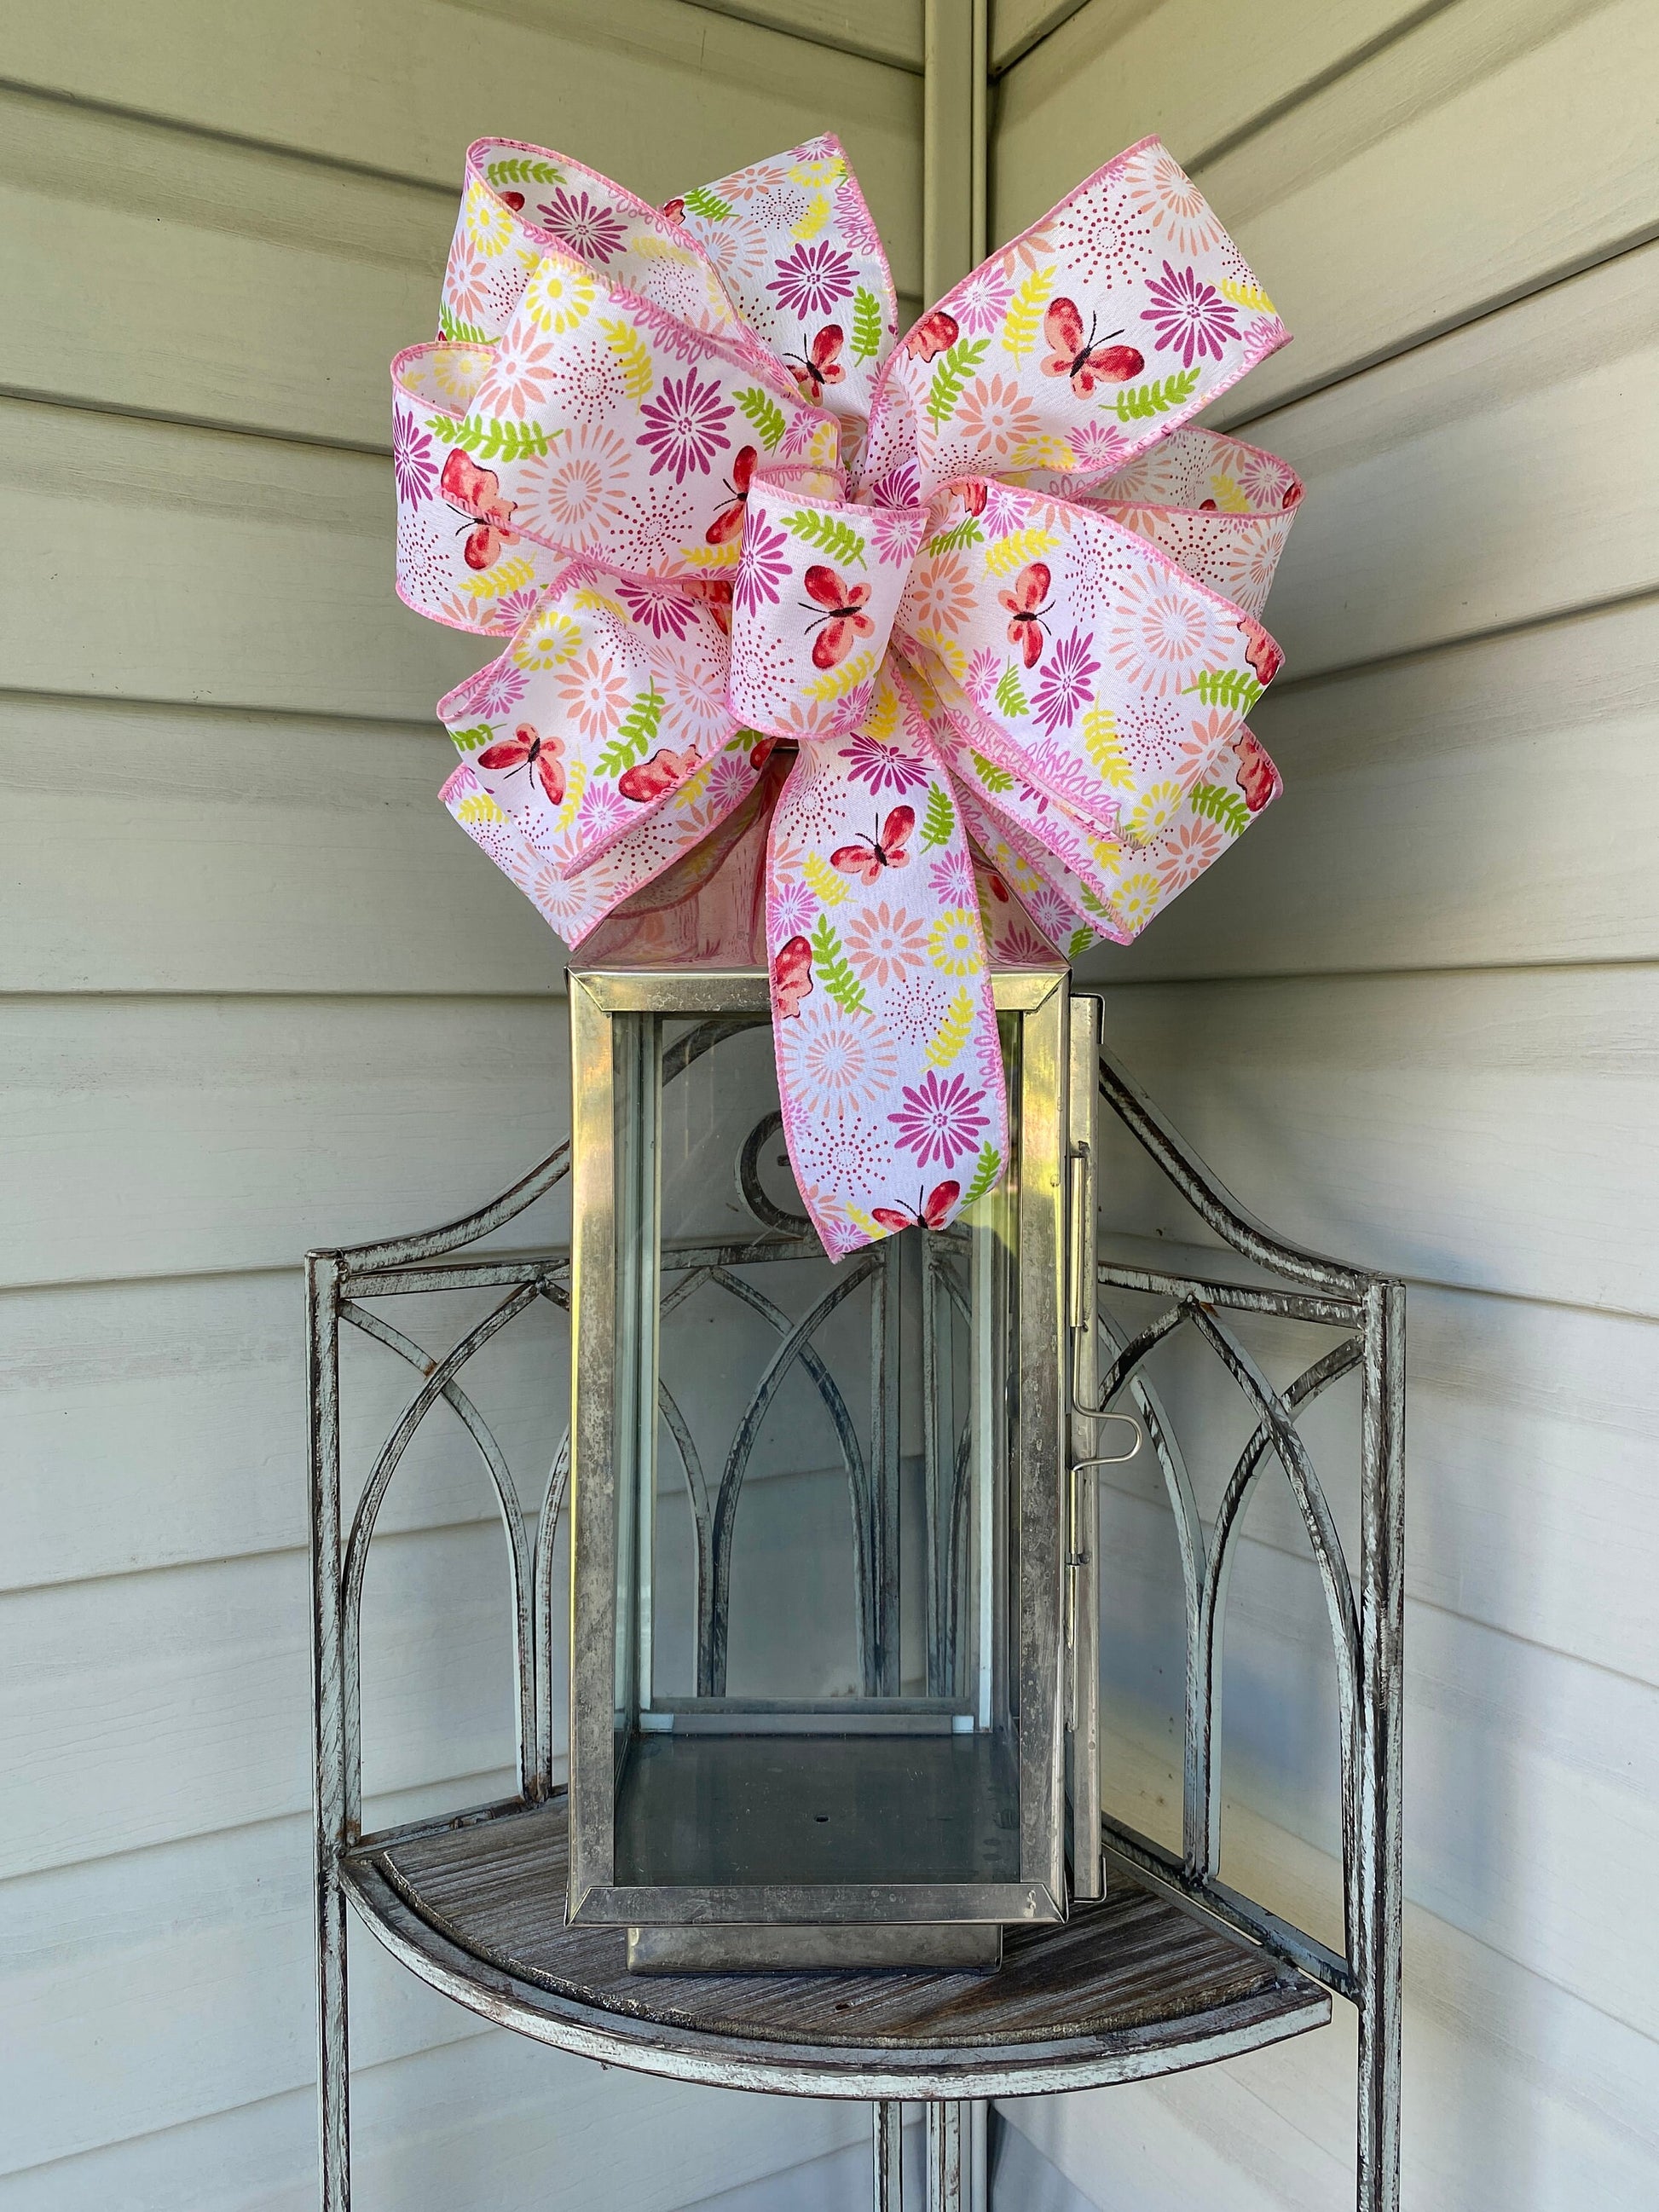 Summer Butterfly Wreath Bow, Summer Lantern Bow, Porch Light Bow, Mailbox Bow,Butterfly Floral Decor, Summer Deck Party Bow, gift basket bow